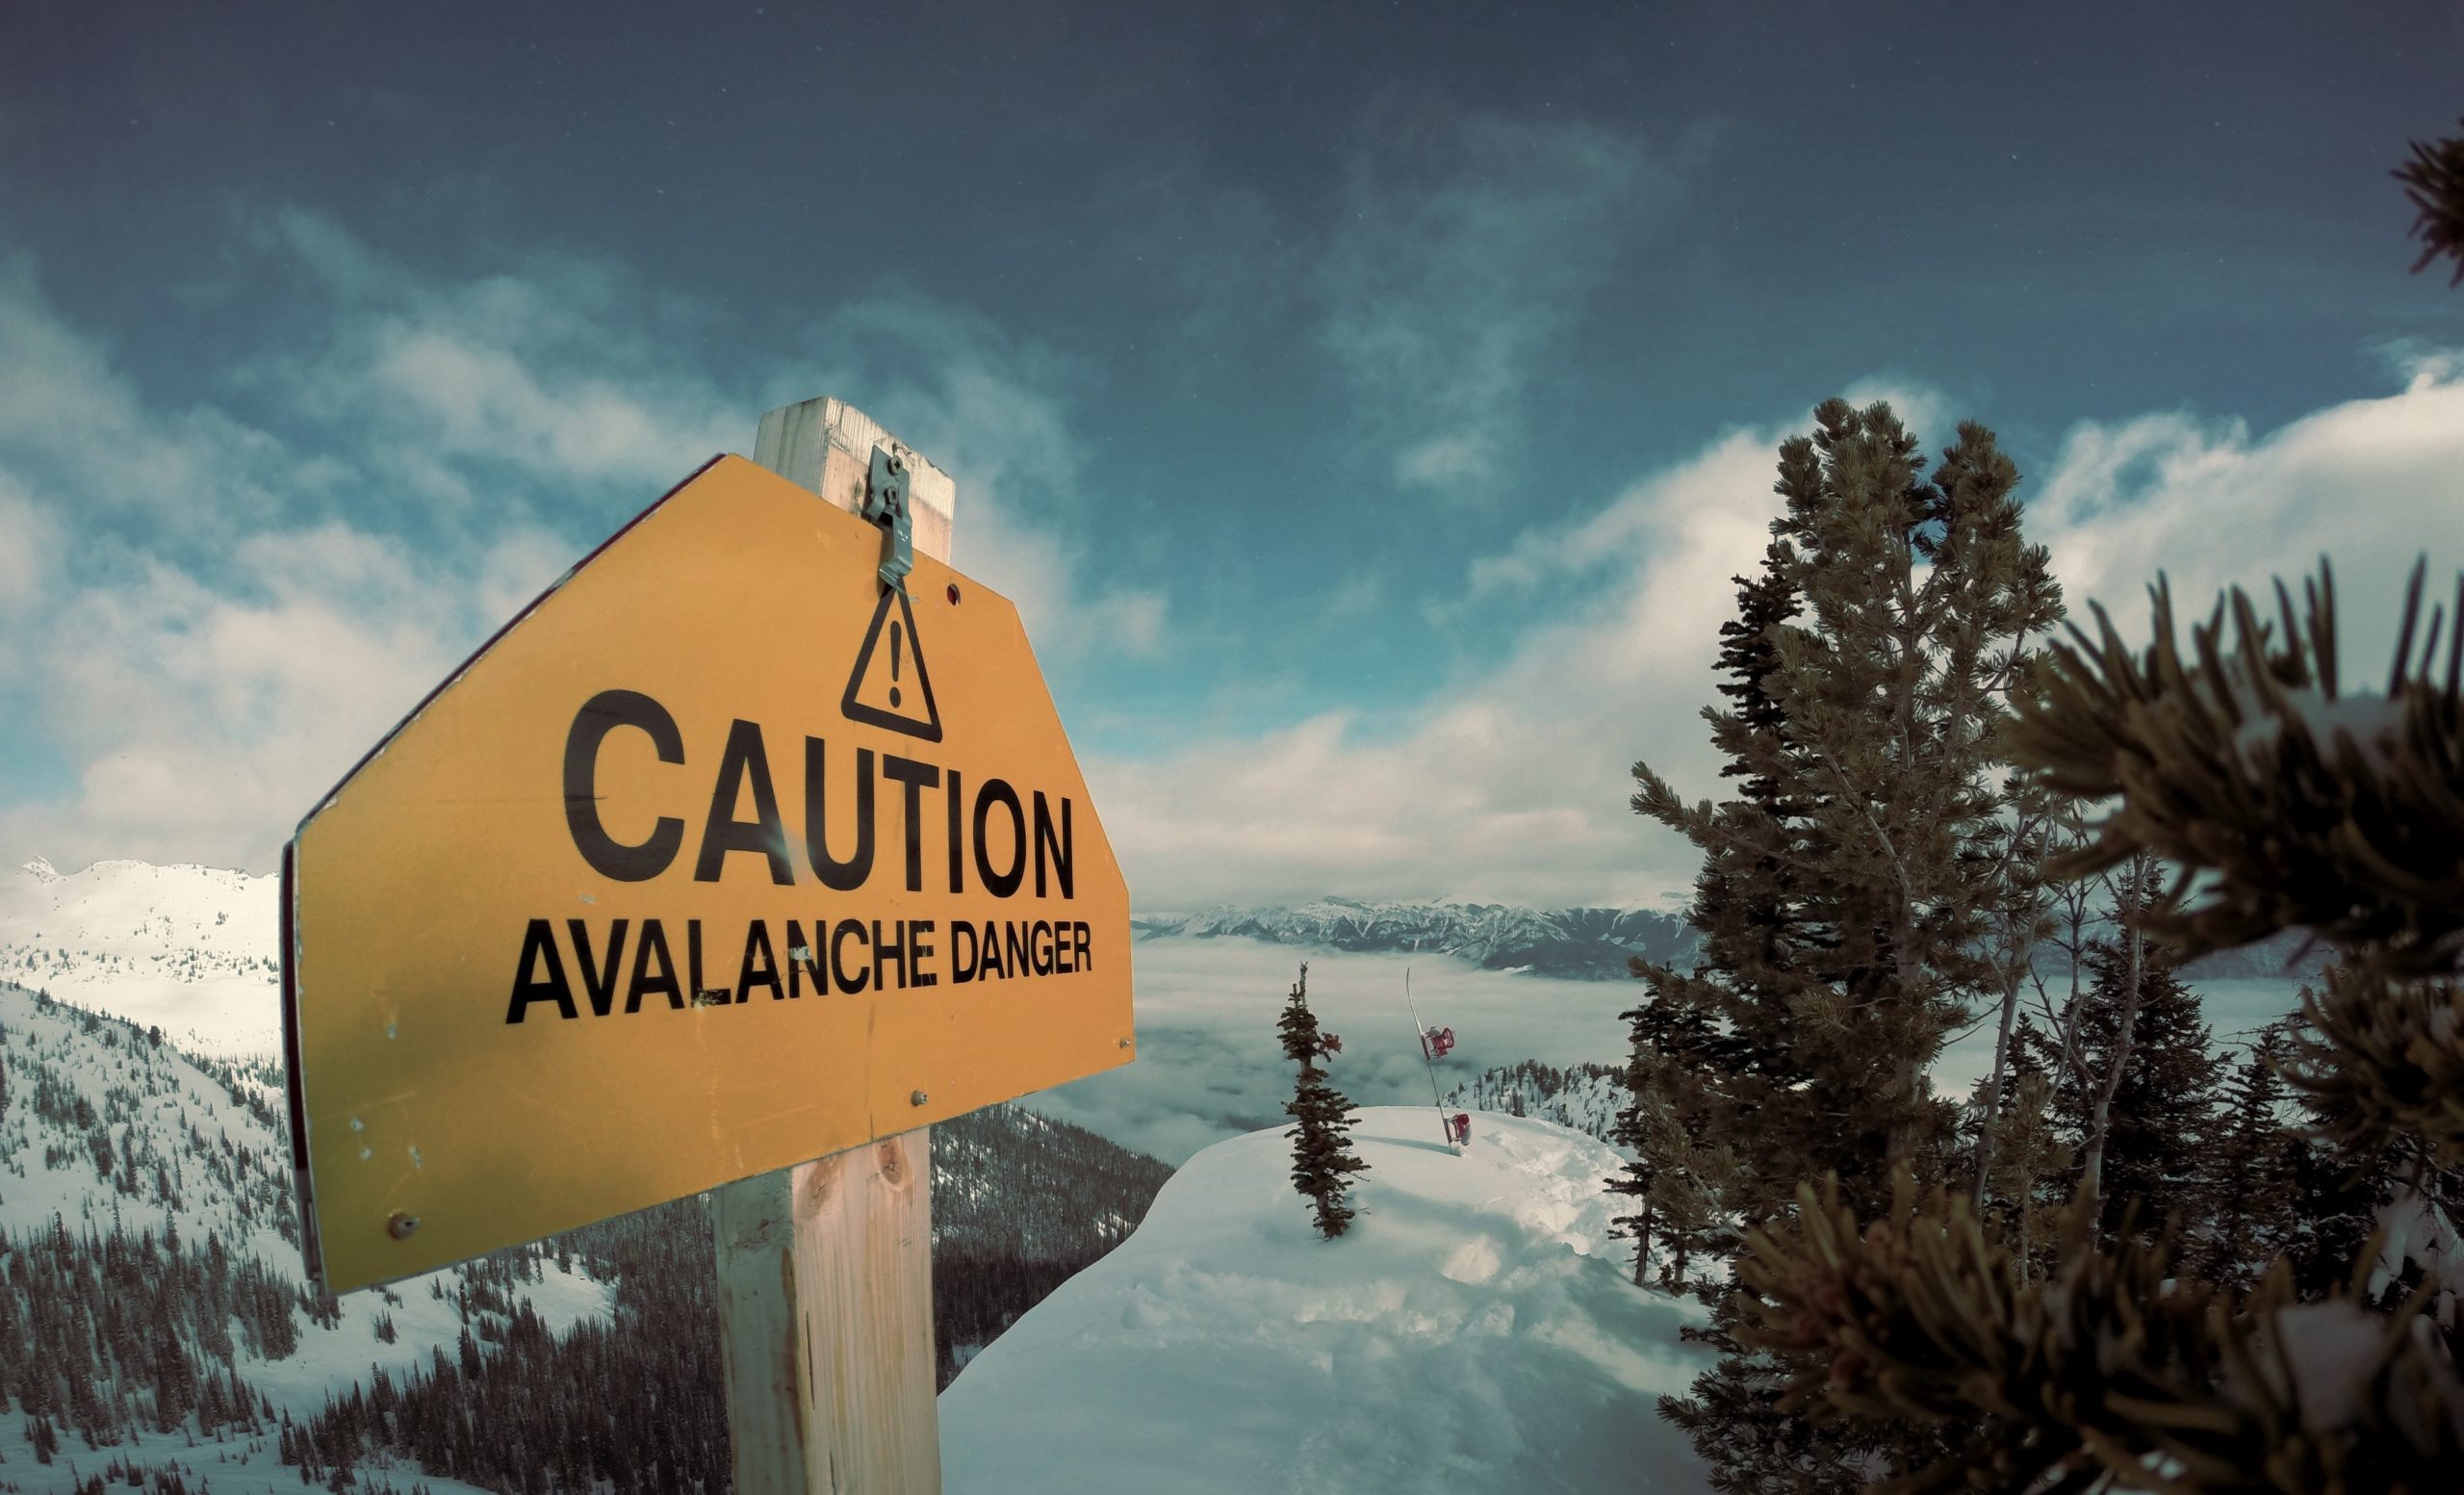 Sign that says "Caution Avalanche Danger", background is winter mountain view.